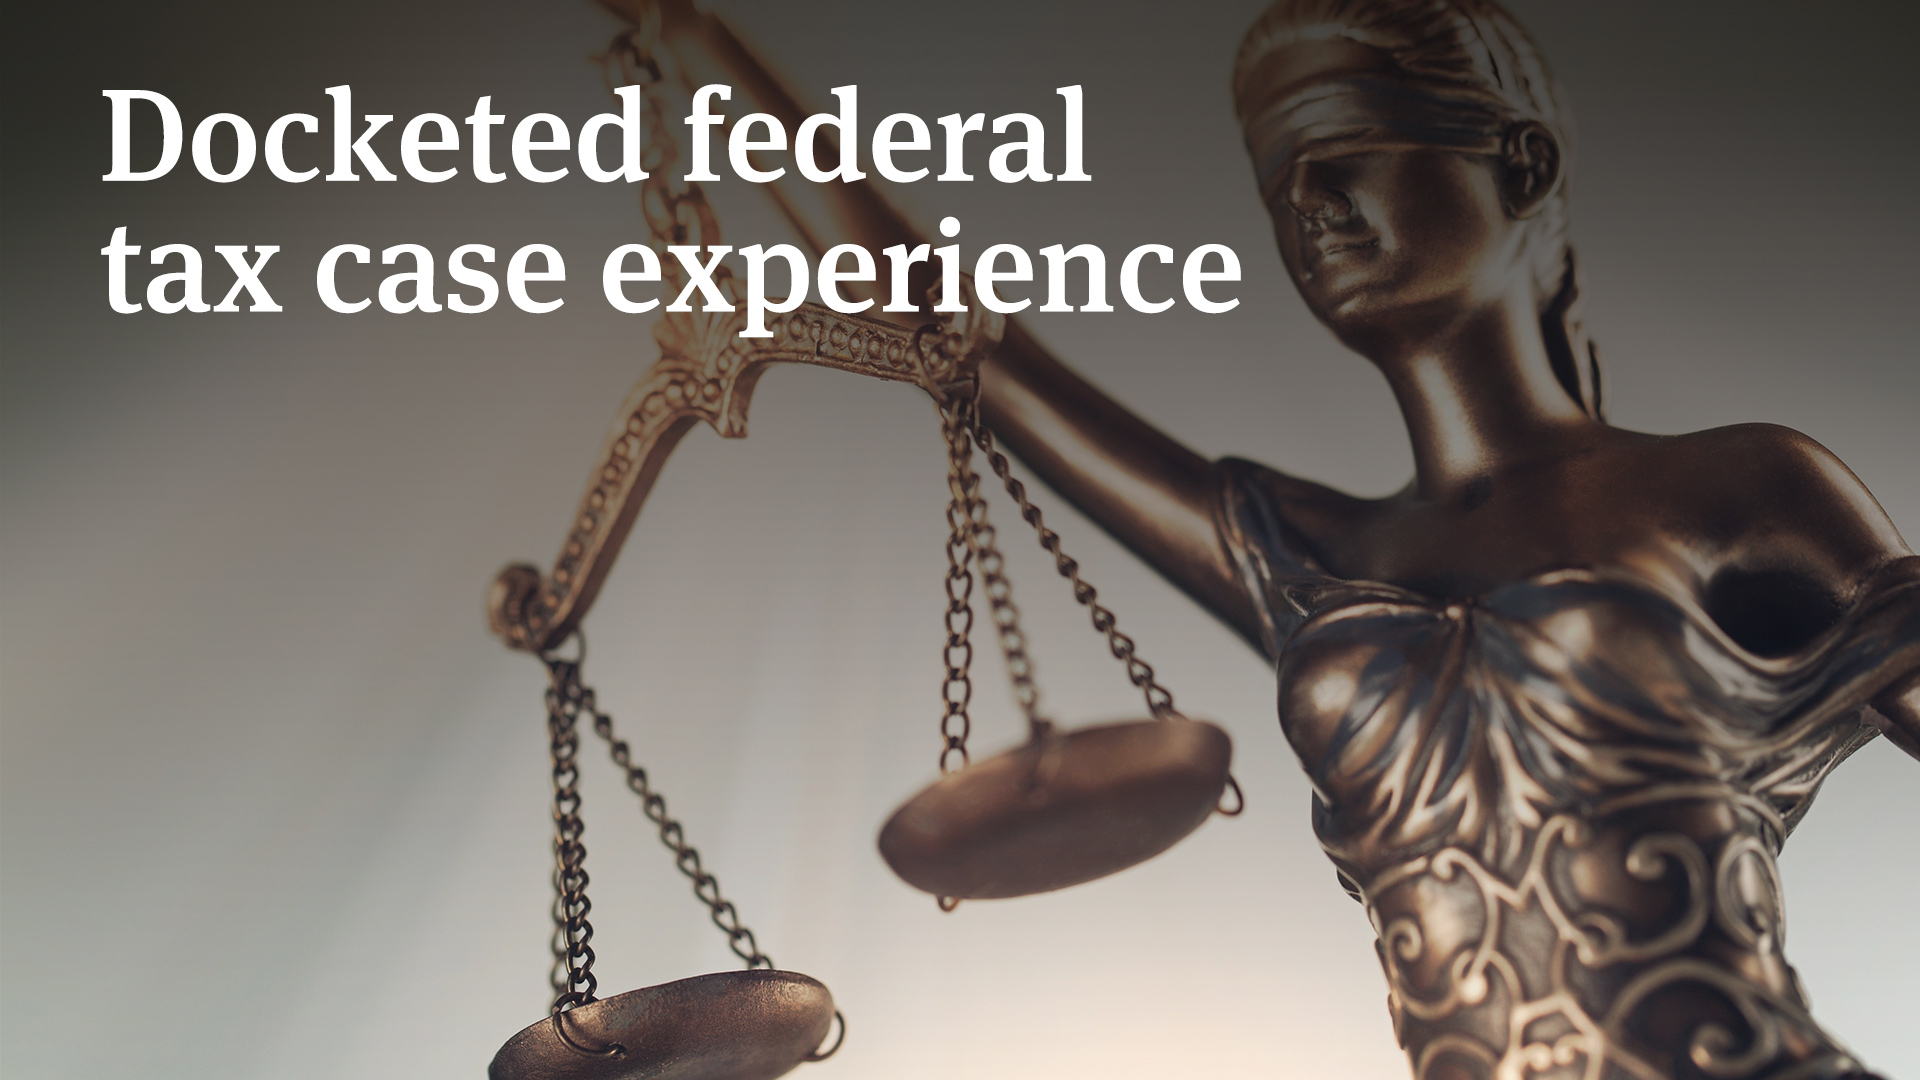 Docketed federal tax case experience